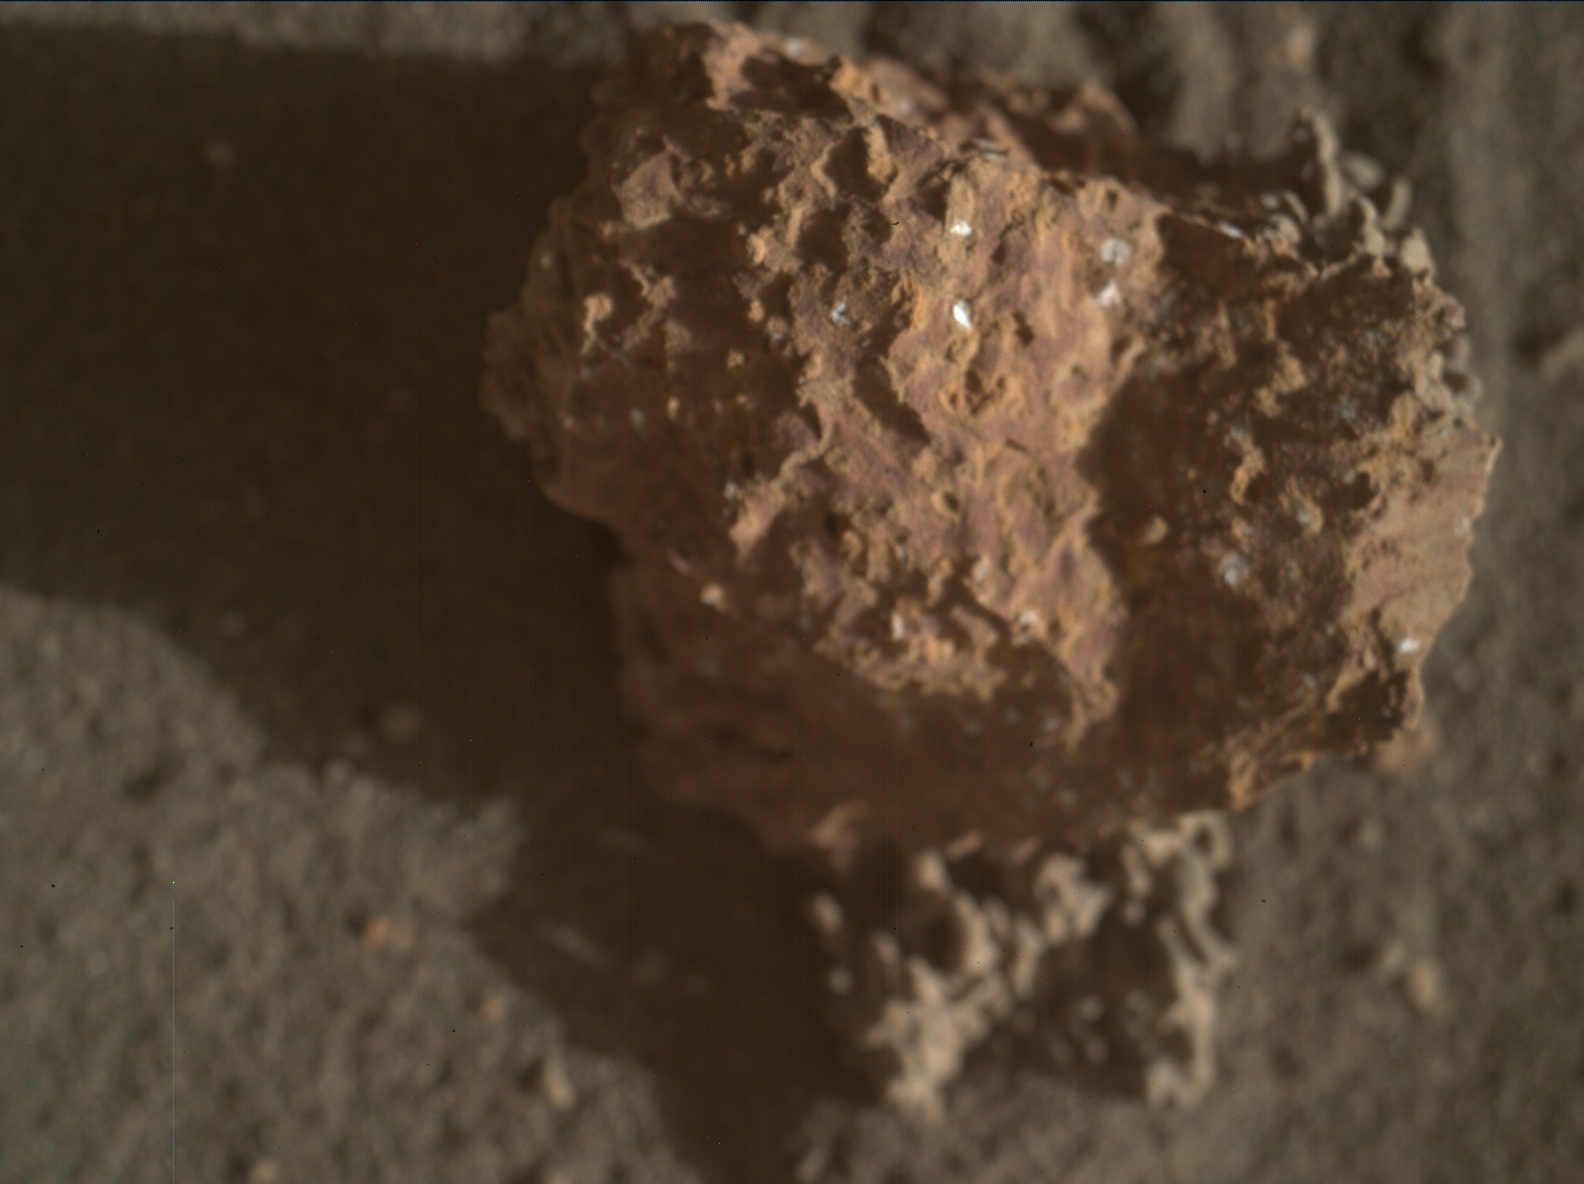 Nasa's Mars rover Curiosity acquired this image using its Mars Hand Lens Imager (MAHLI) on Sol 3272